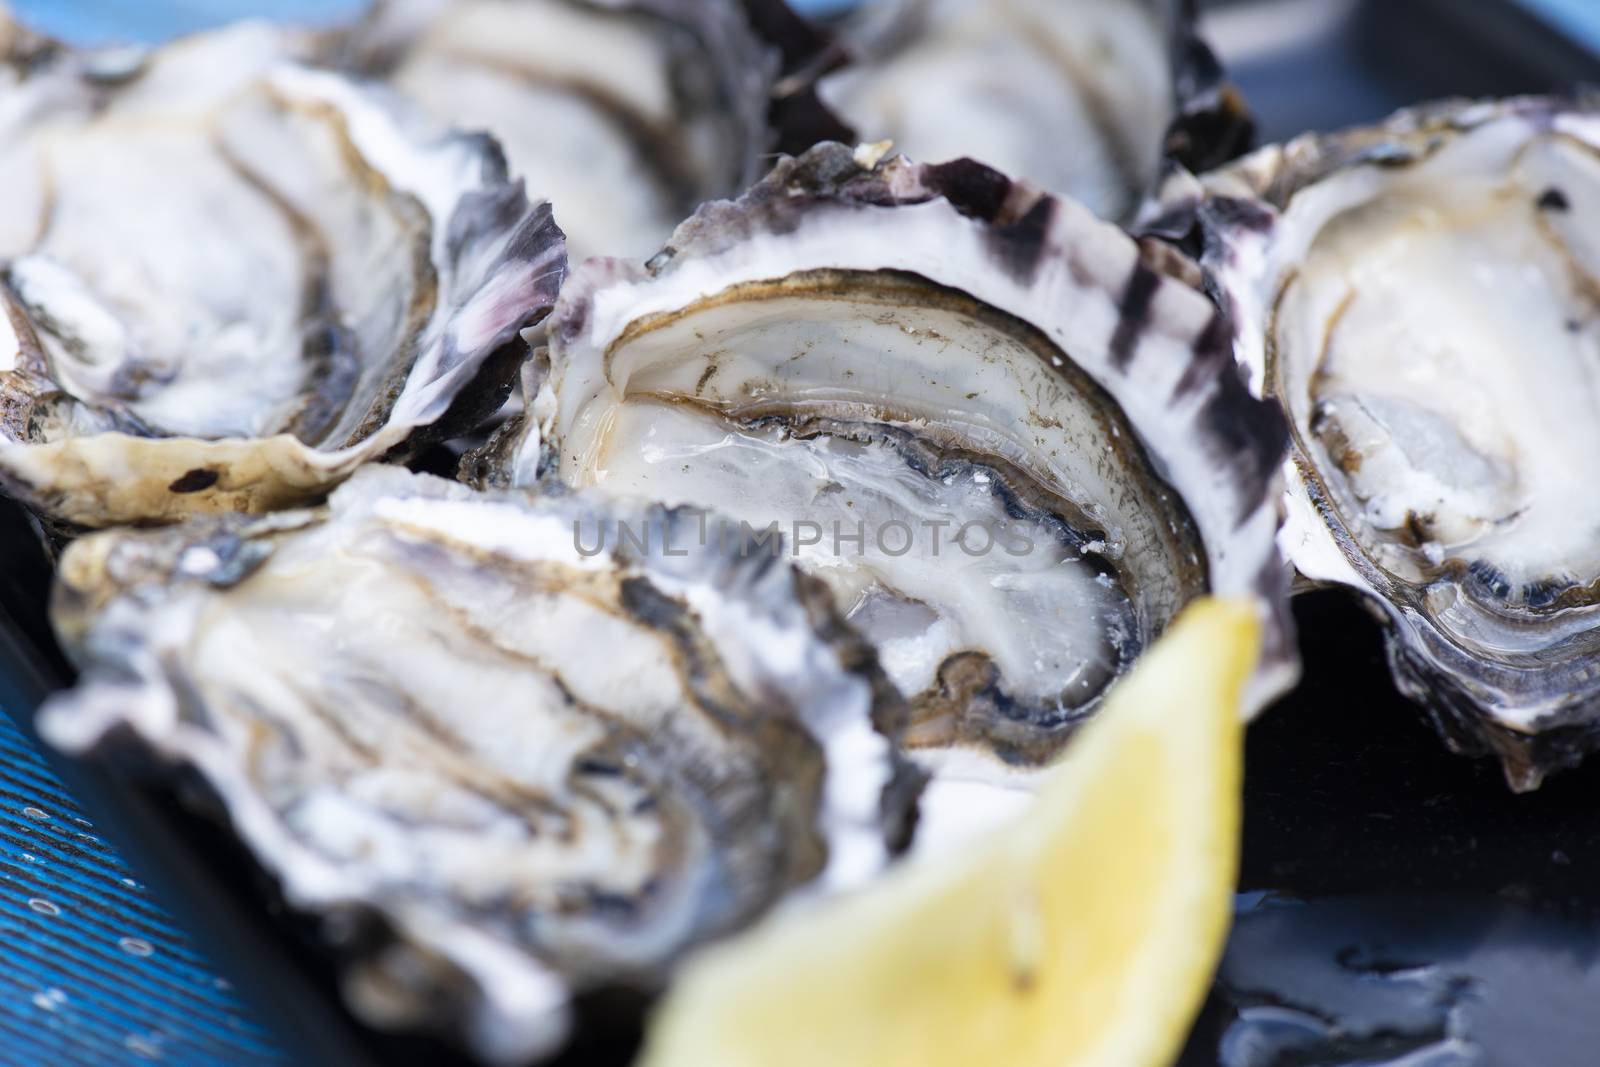 Closeup of large fresh shucked oysters with a blue background.